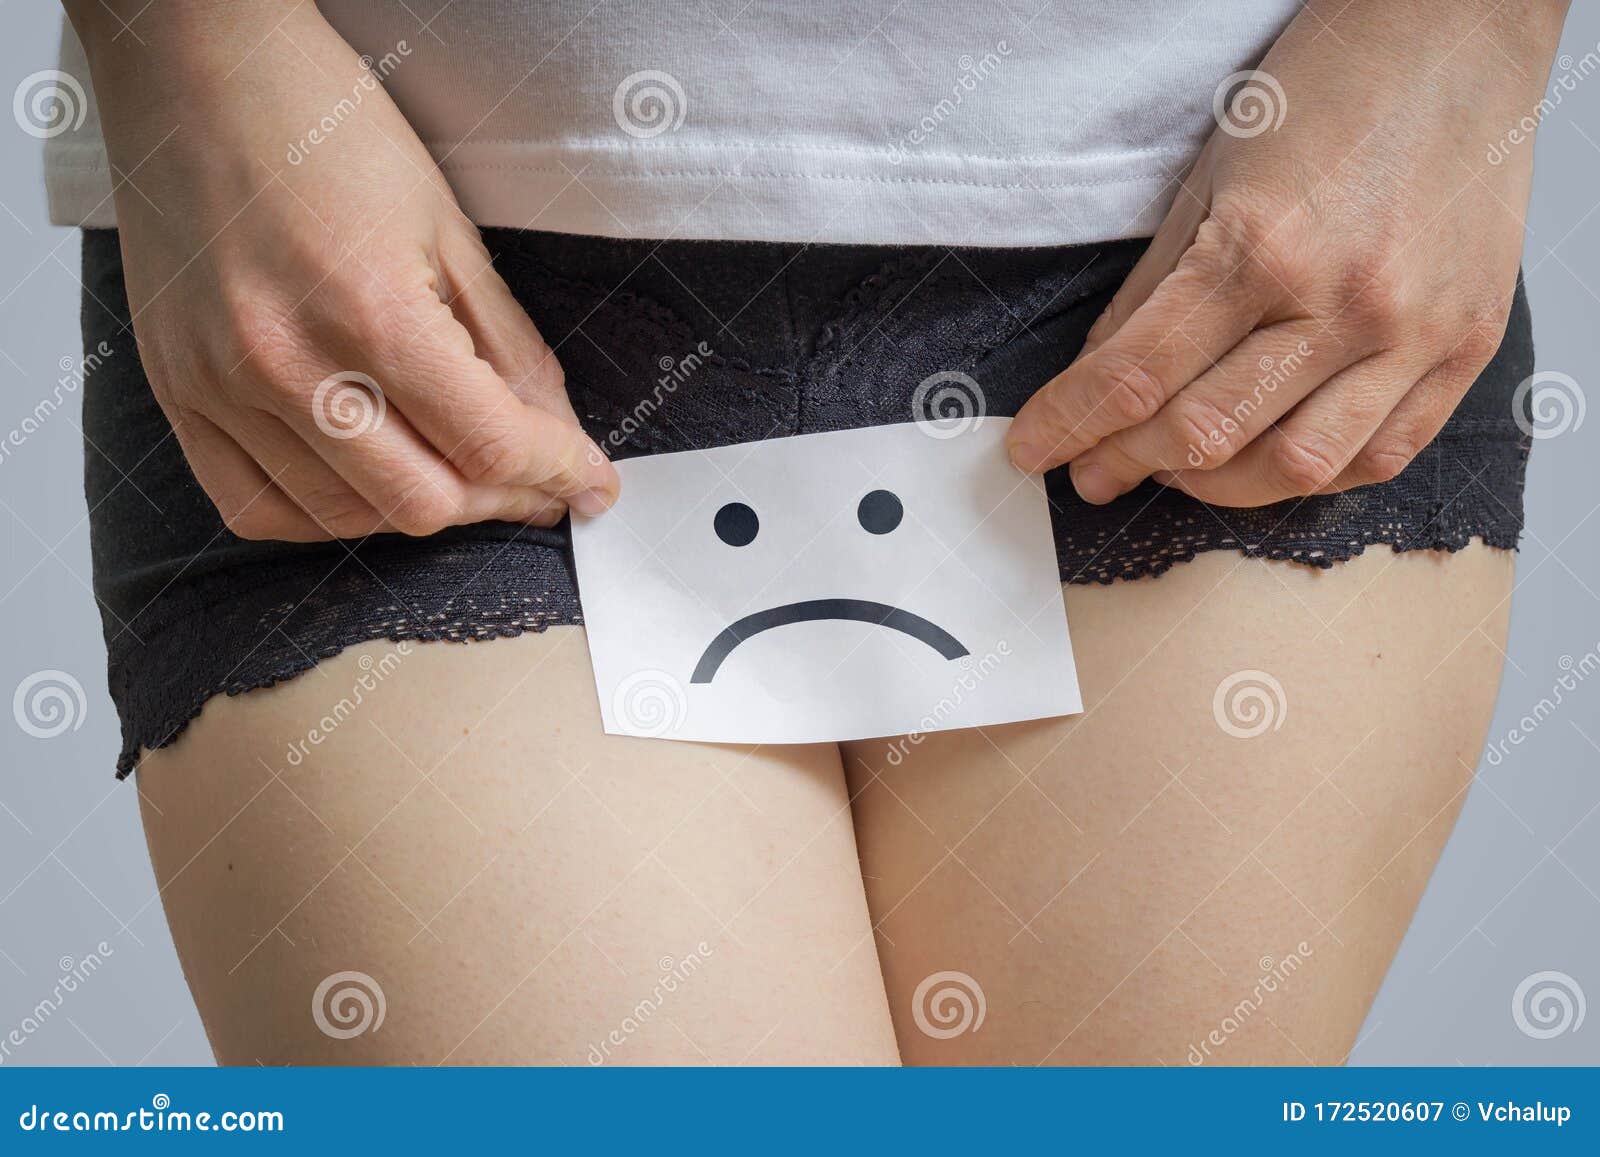 vaginal or menstrual problems concept. young woman holds paper with sos above crotch.